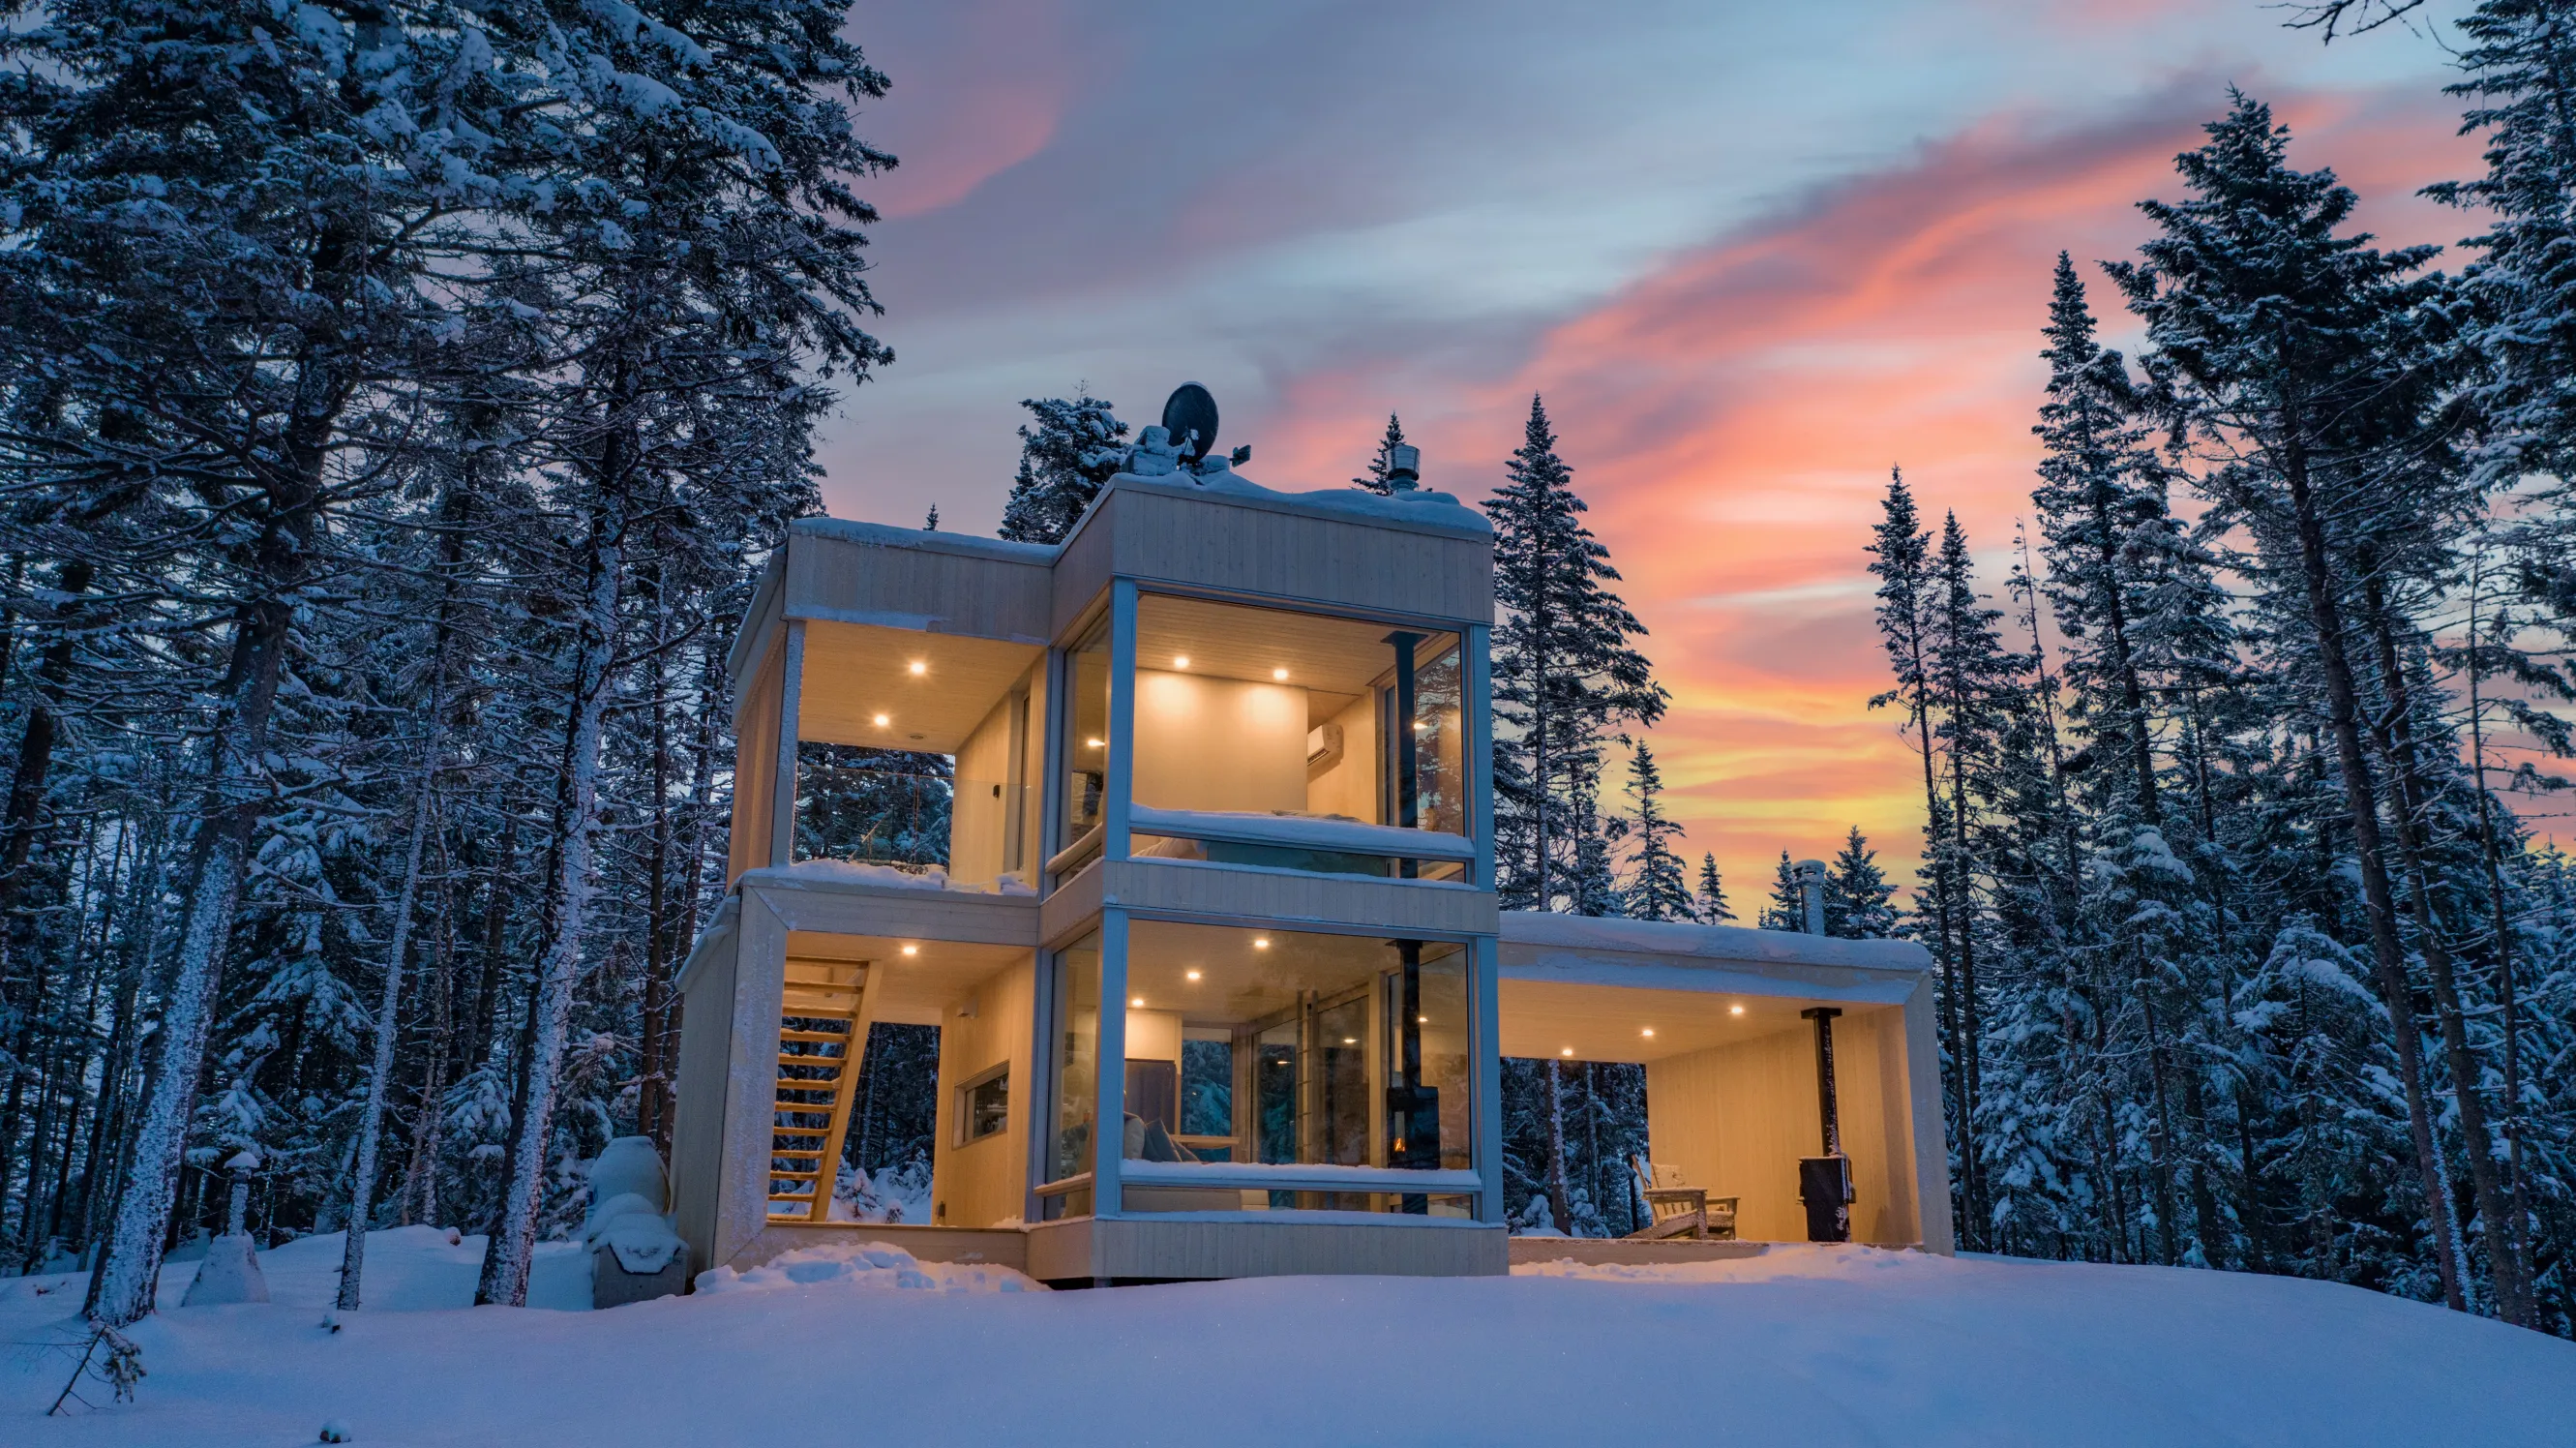 A modern two-story winter getaway atop a snowy hill surrounded by snowy trees, backed by a pink and yellow sunset sky.